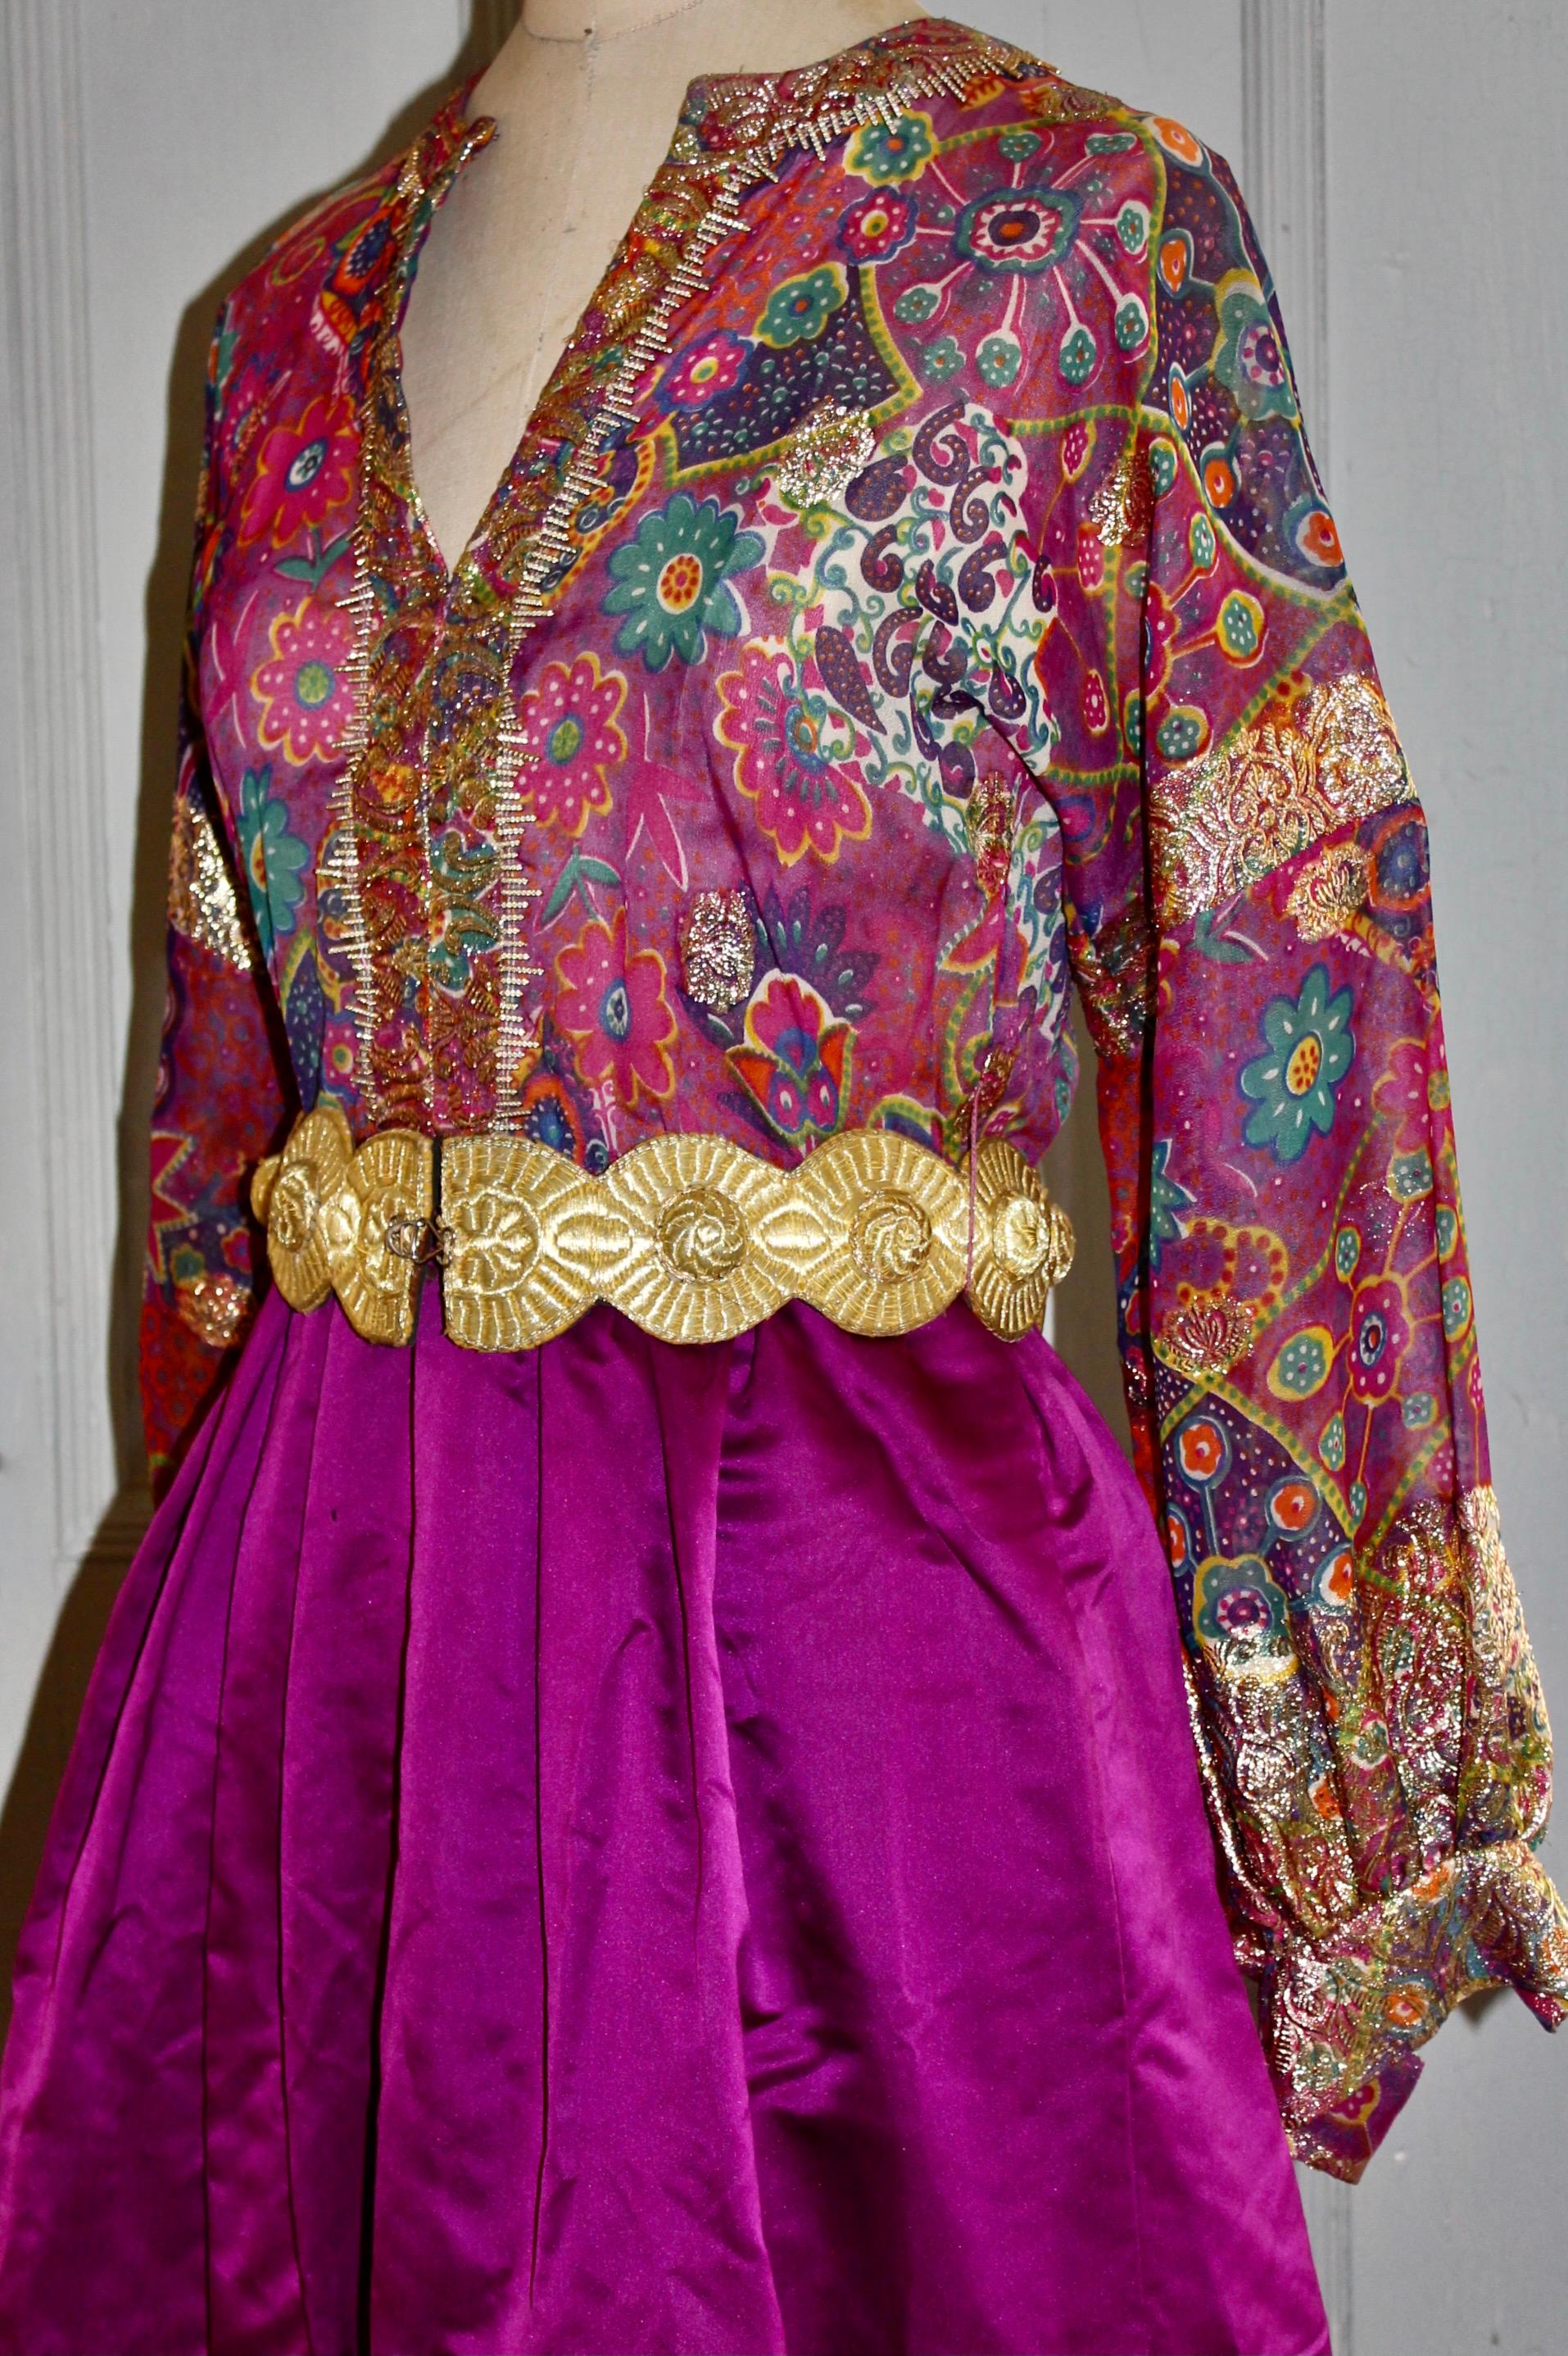 An Indian inspired gown with a colorful metallic semi shear silk organza top, and a violet
floor length silk taffeta skirt. Belted with a gold leather clasped belt. 28